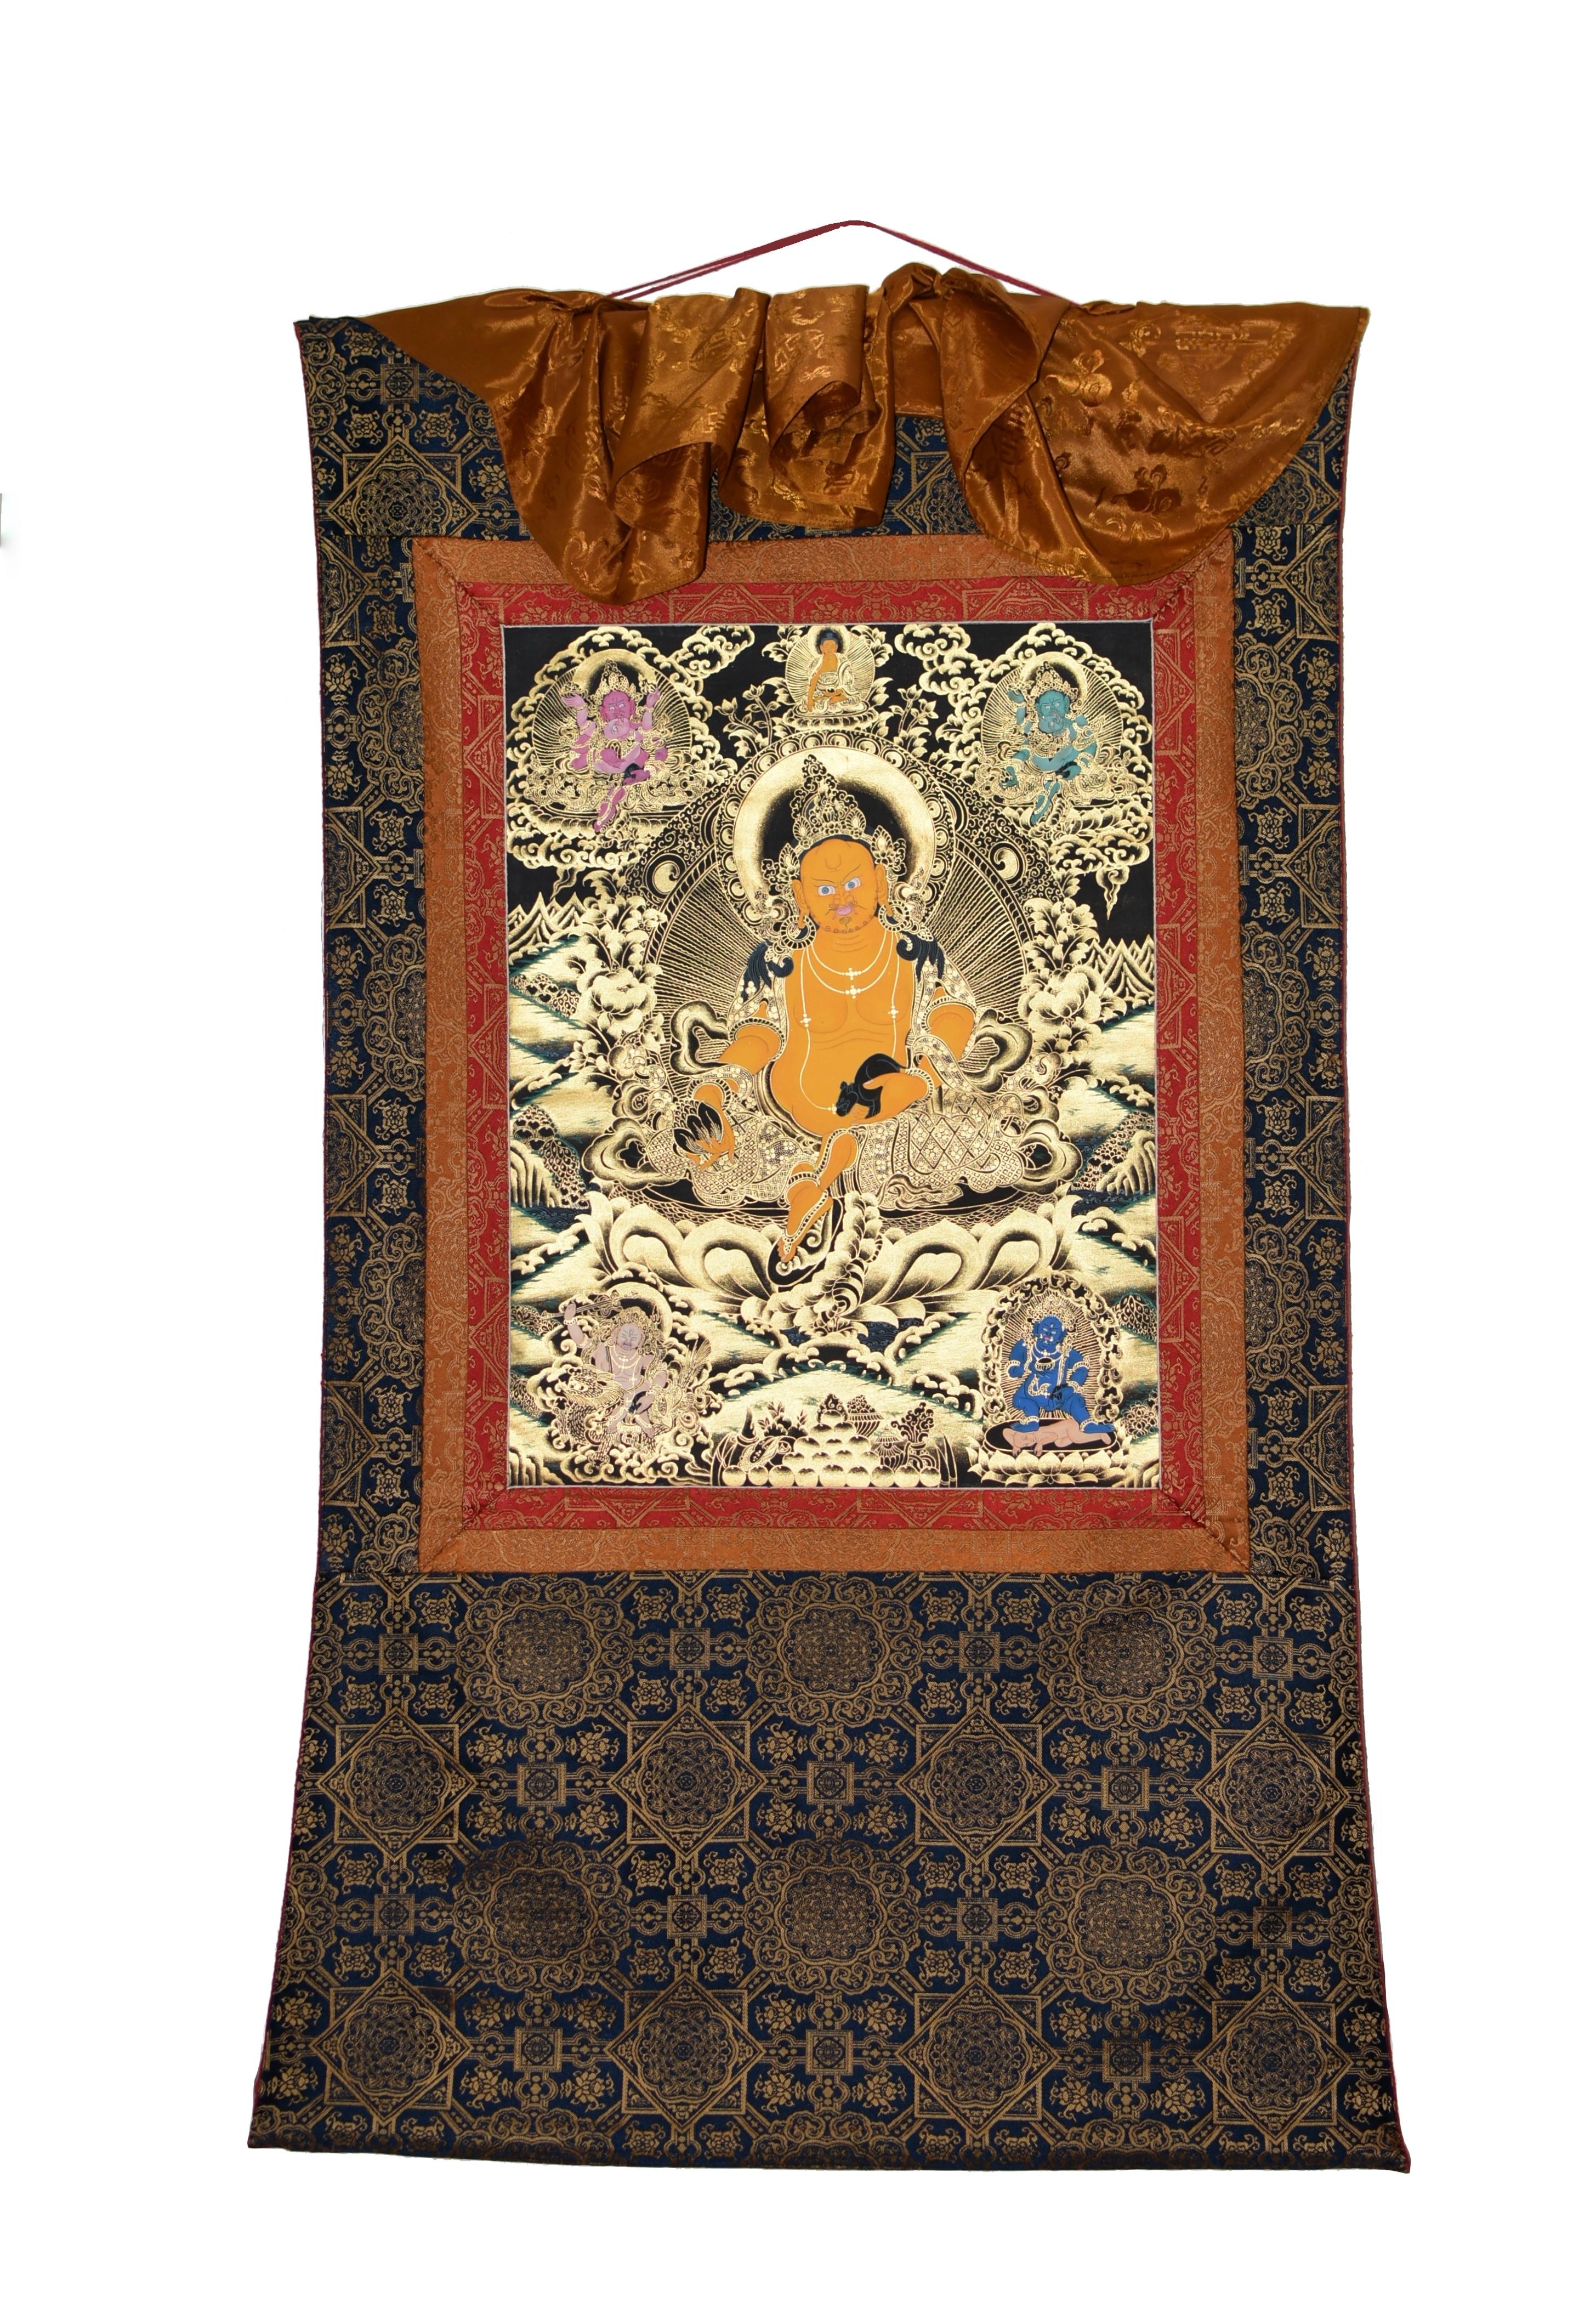 A finely painted Tibetan Thangka featuring the five wealth gods Jambhala. In the center the most powerful Yellow Jambhala sits on a lotus throne in the vajra position with his right foot on a large conch shell and lotus flower. His left toes are